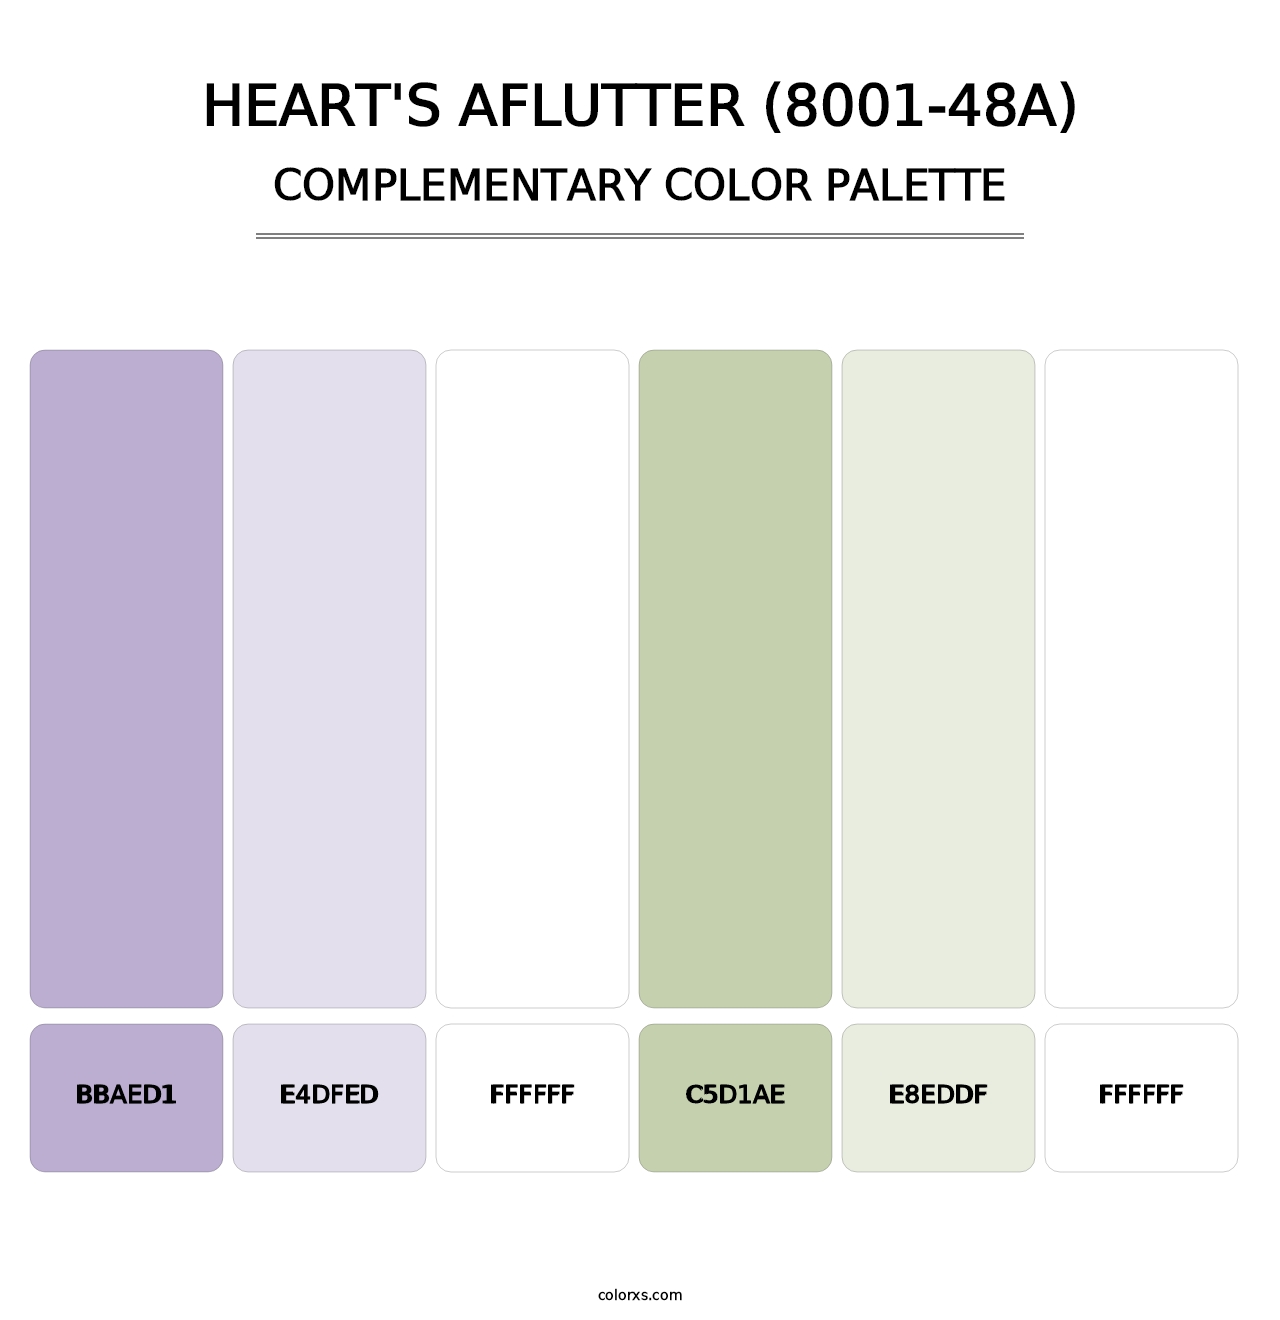 Heart's Aflutter (8001-48A) - Complementary Color Palette